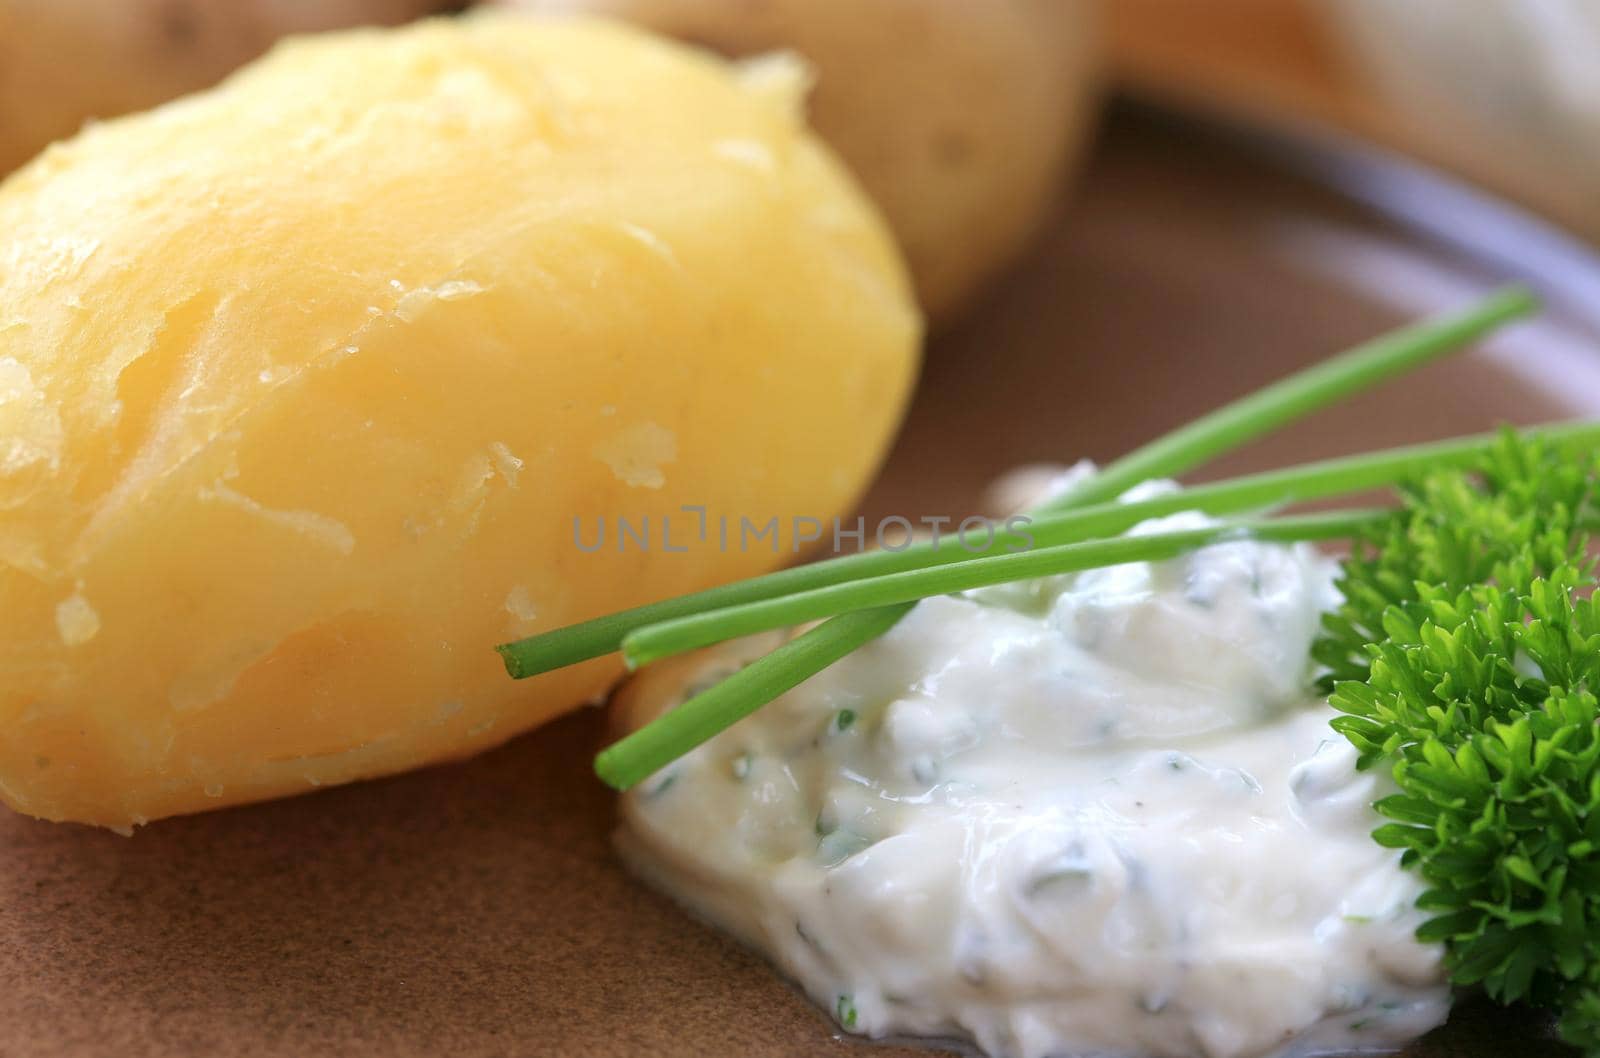 Peeled baked potato with sour cream and herbs by Kasparart